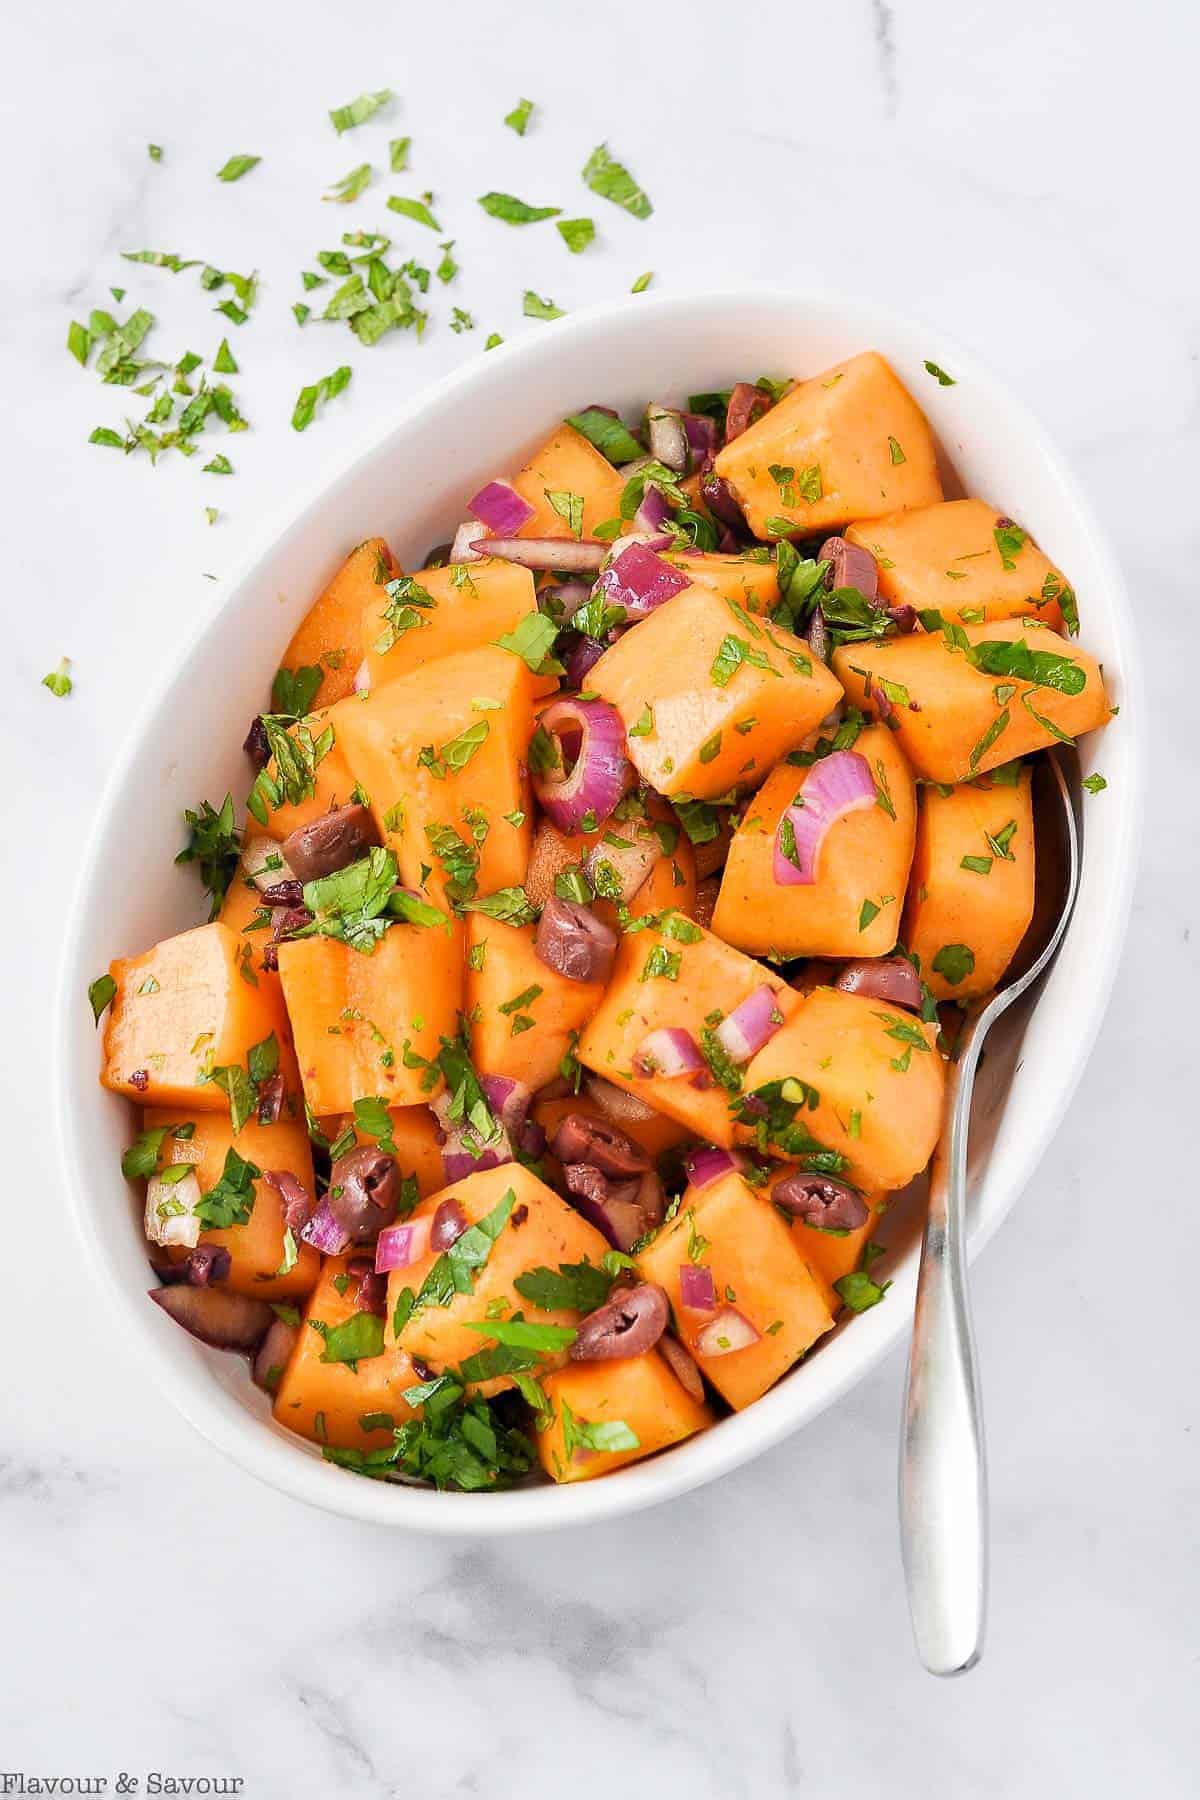 Mediterranean Cantaloupe Salad with red onion, olives and mint.